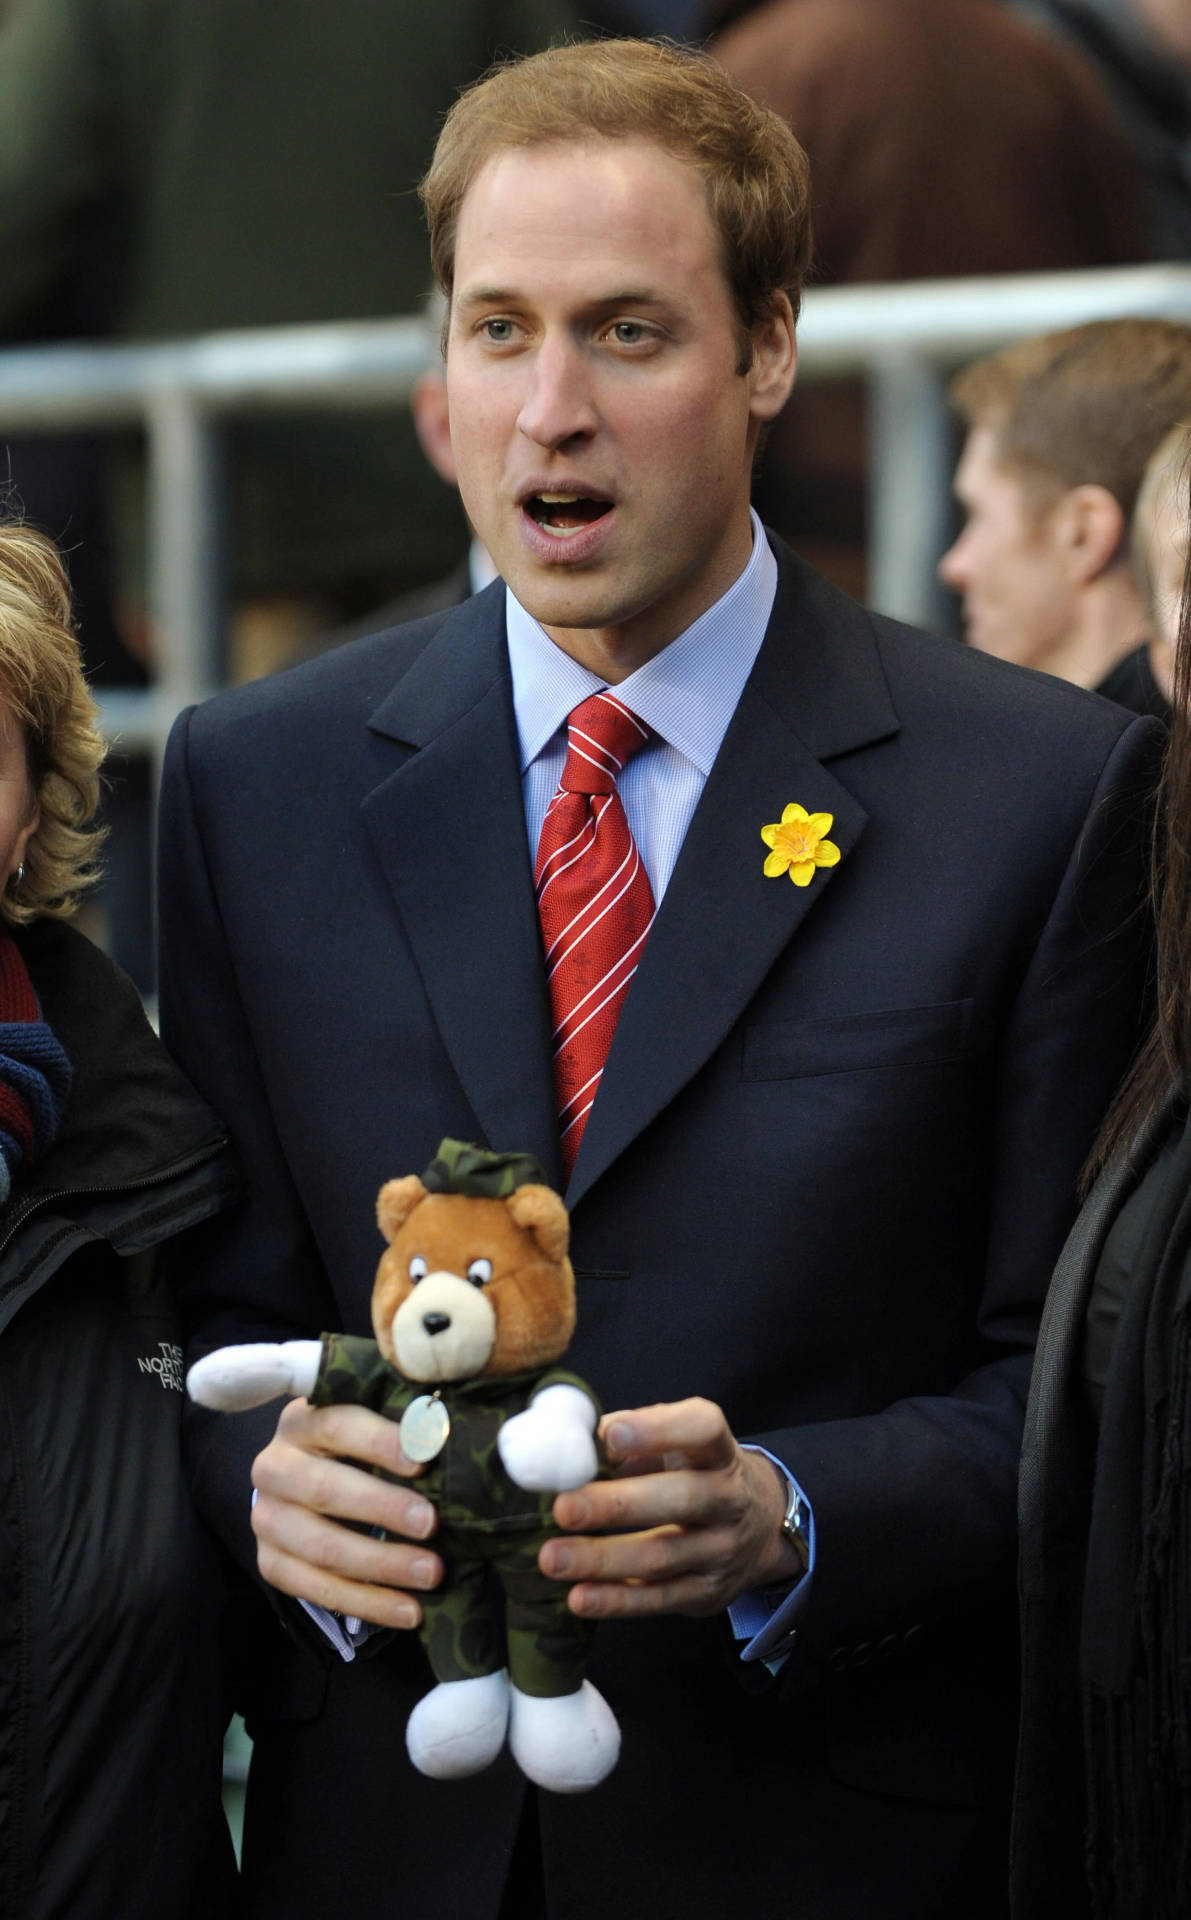 Prince William Smiling While Holding A Stuffed Toy